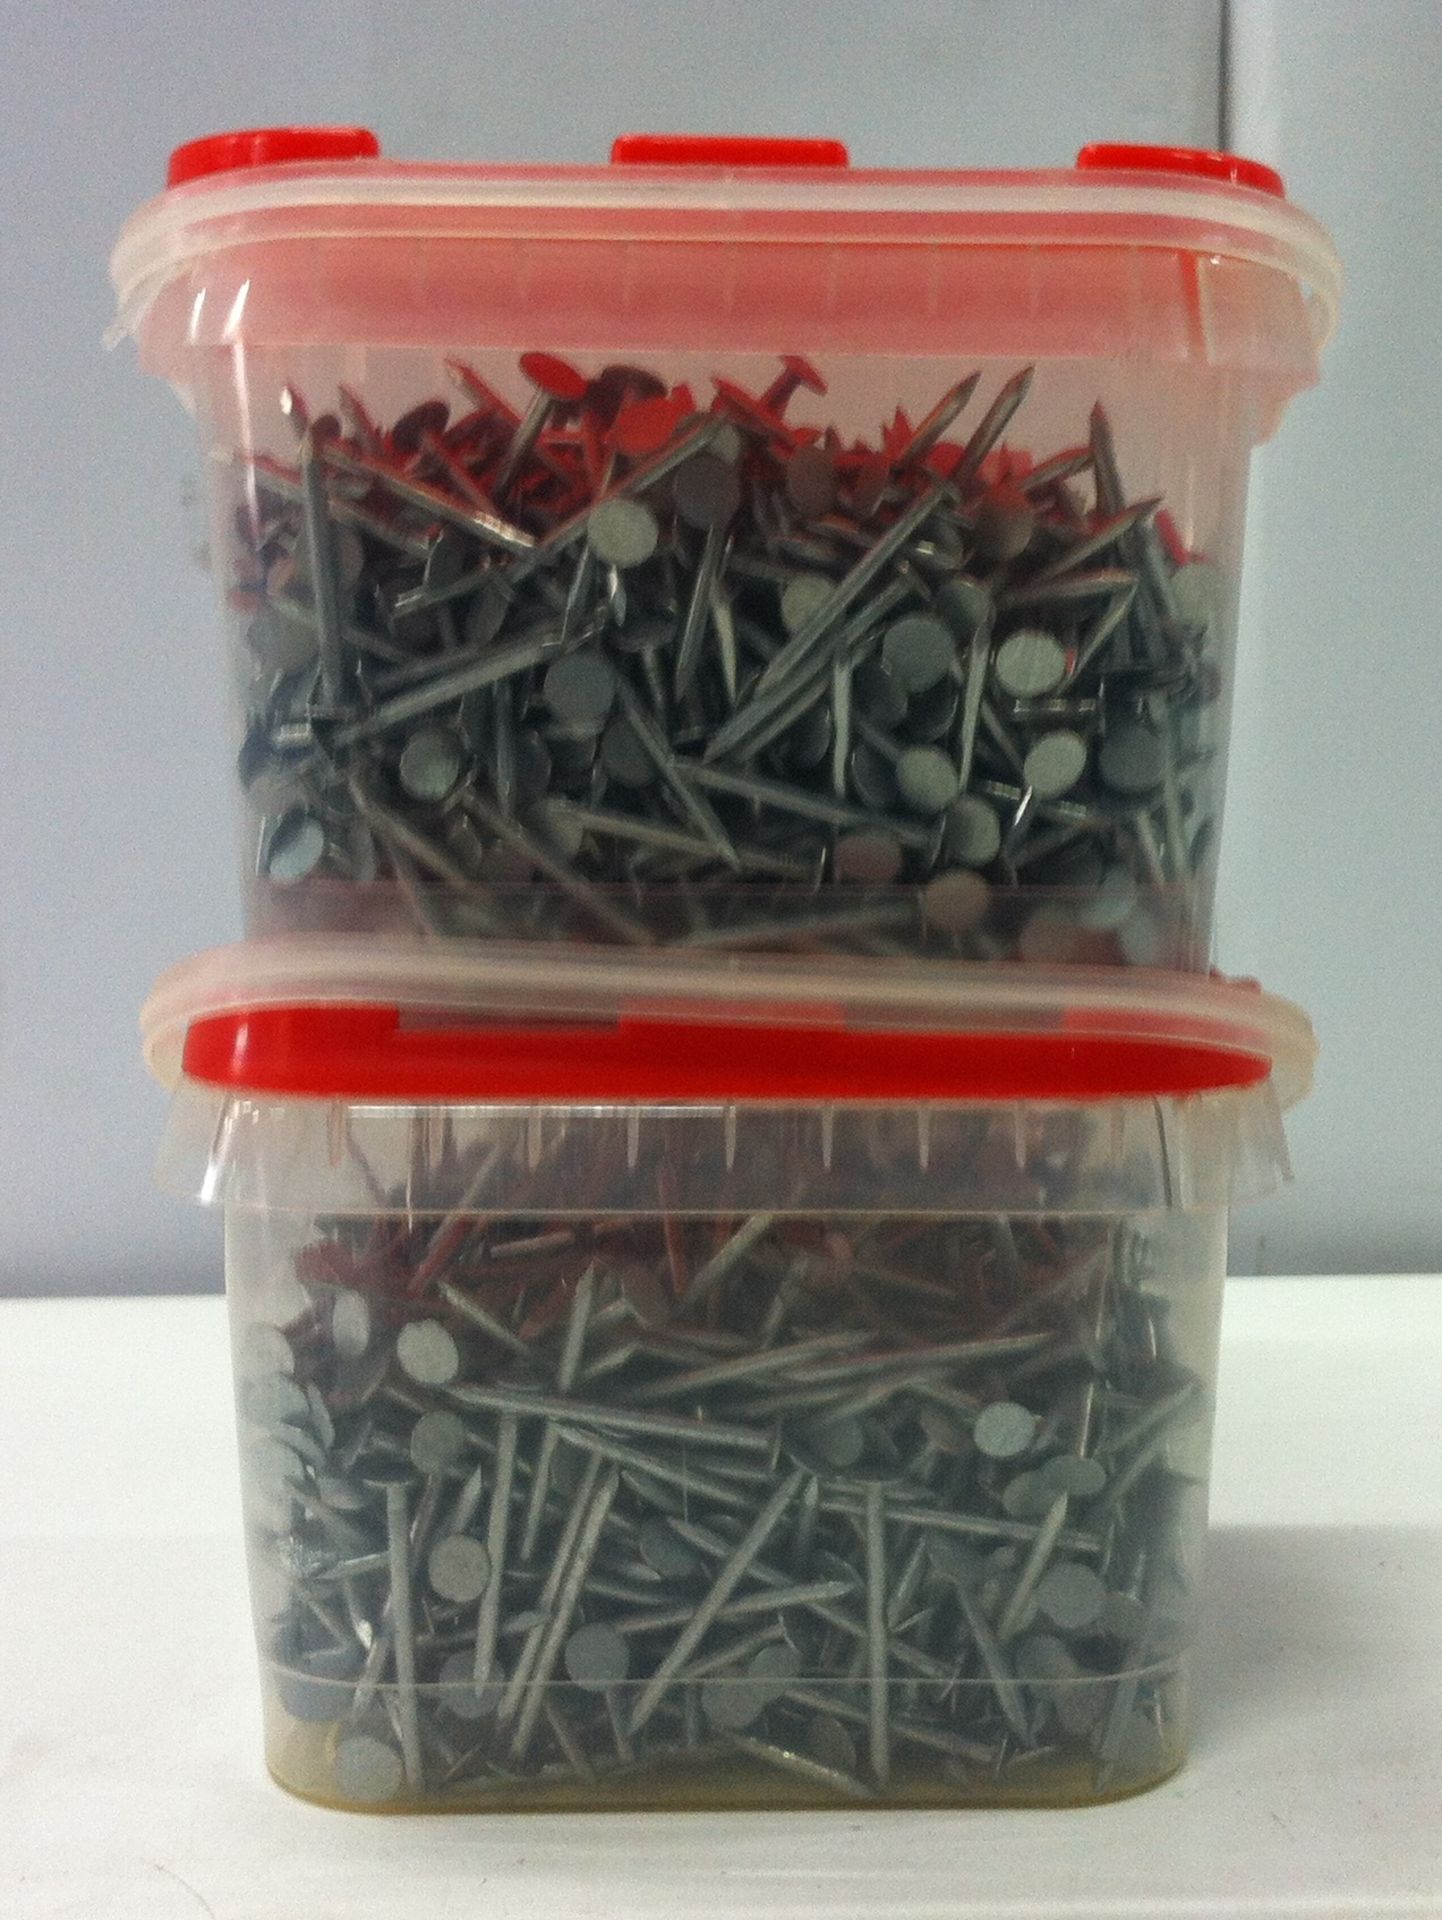 13 x 2.5kg Tubs of Timco Galvanised Clout Nails - See Description for Sizes - Image 4 of 9